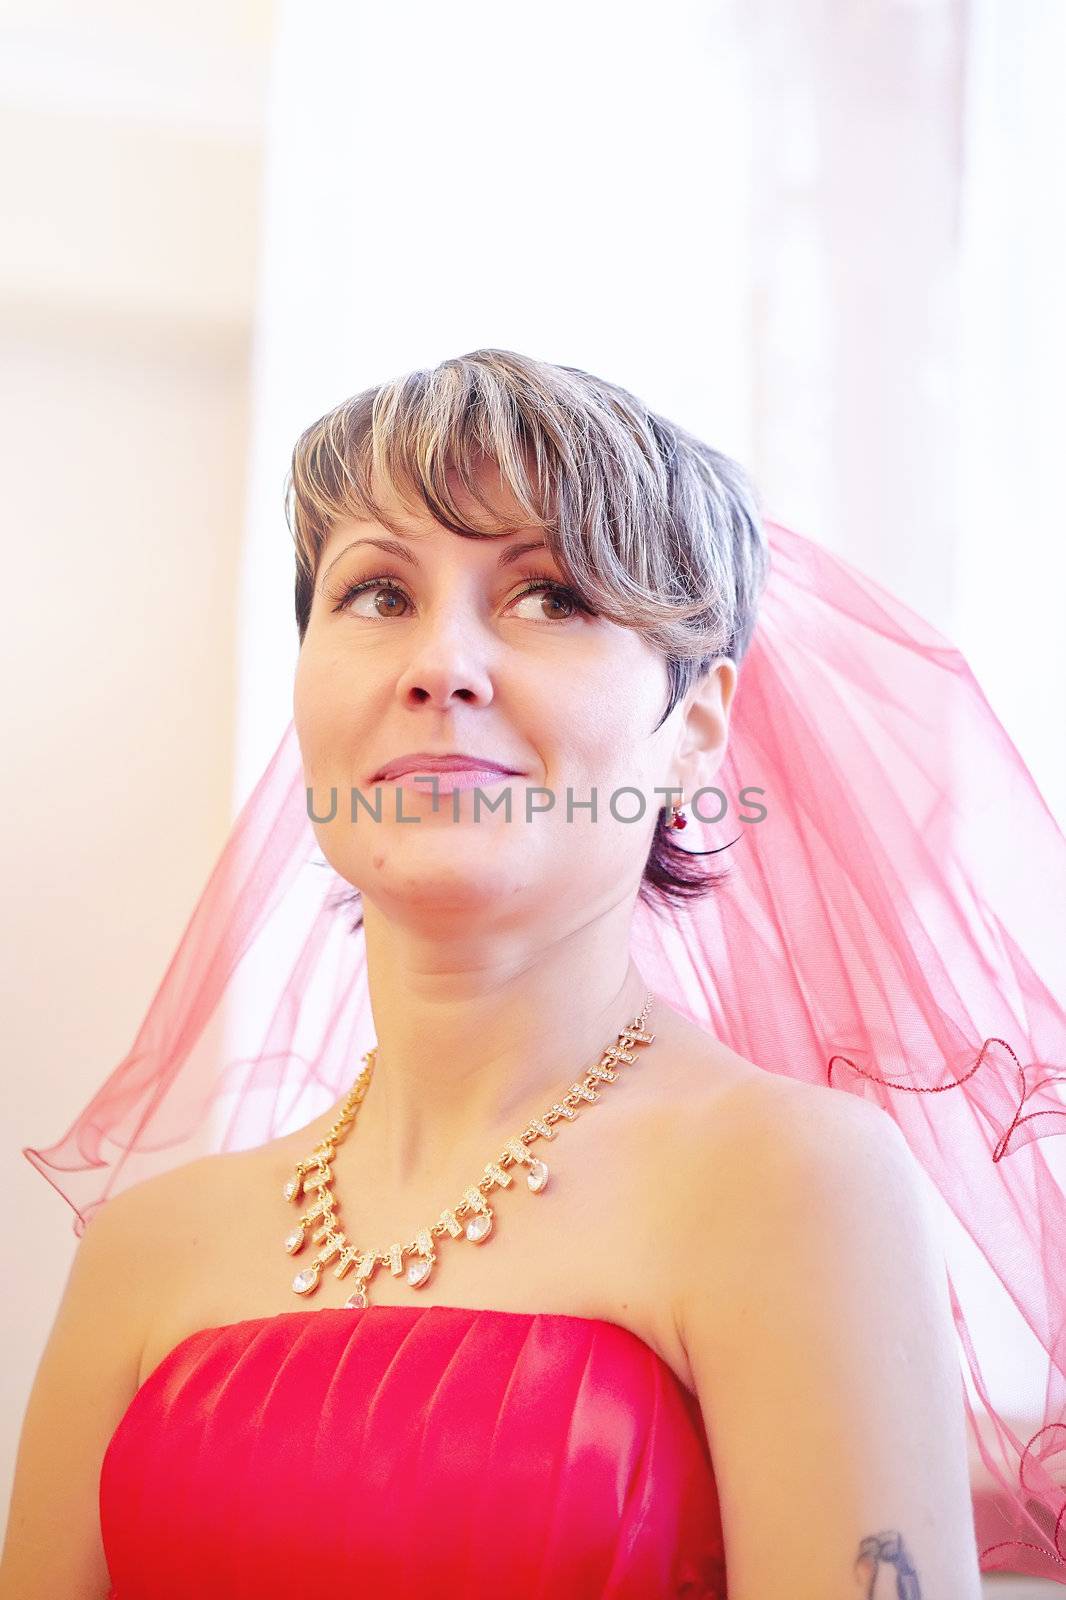 Portrait of the girl bride in a red dress on a light background